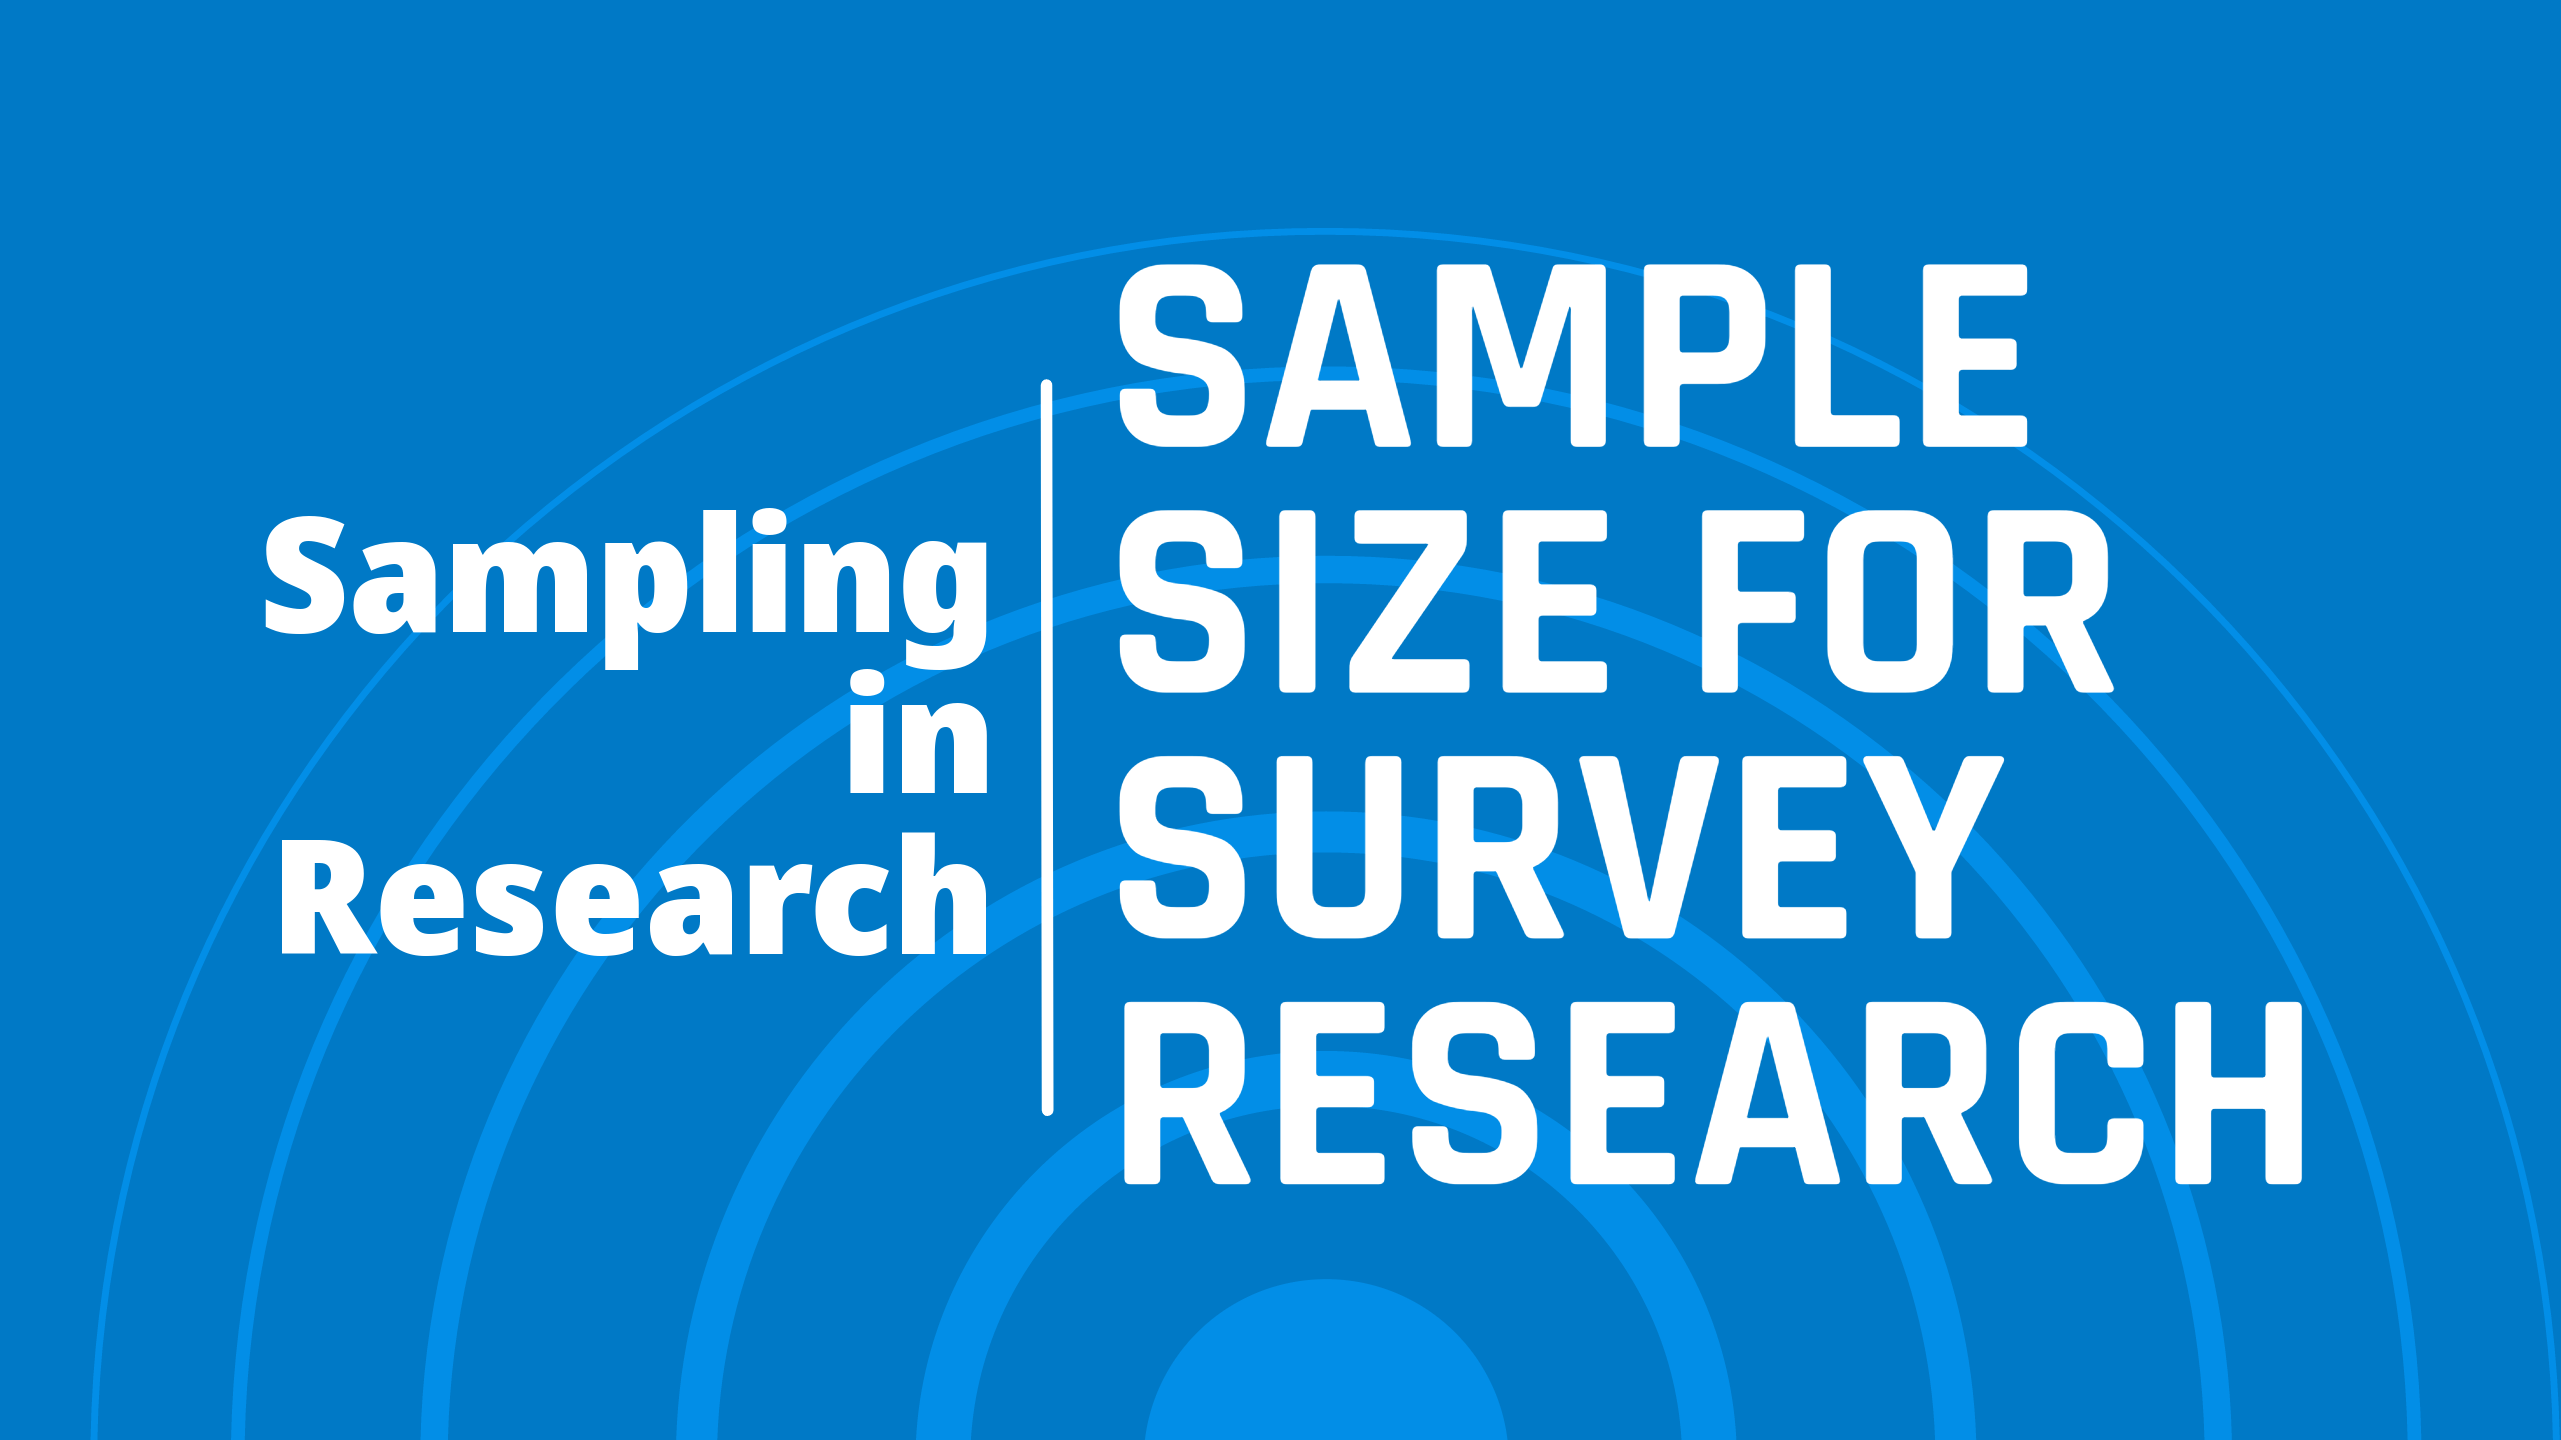 Sample Size for Survey Research